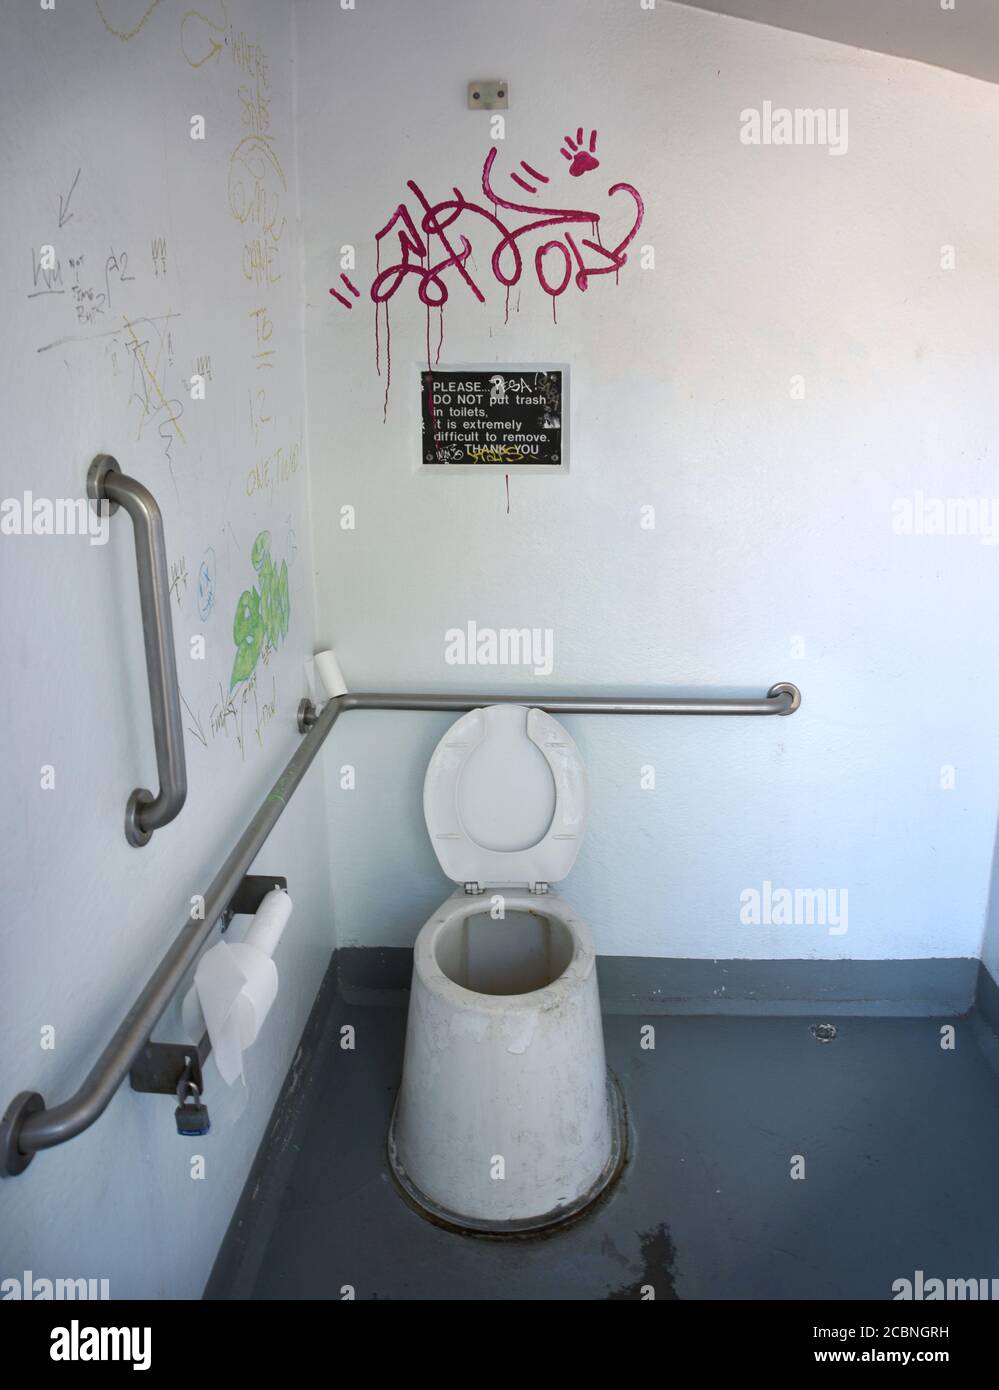 A public restroom or toilet in Madrid New Mexico, USA Stock Photo